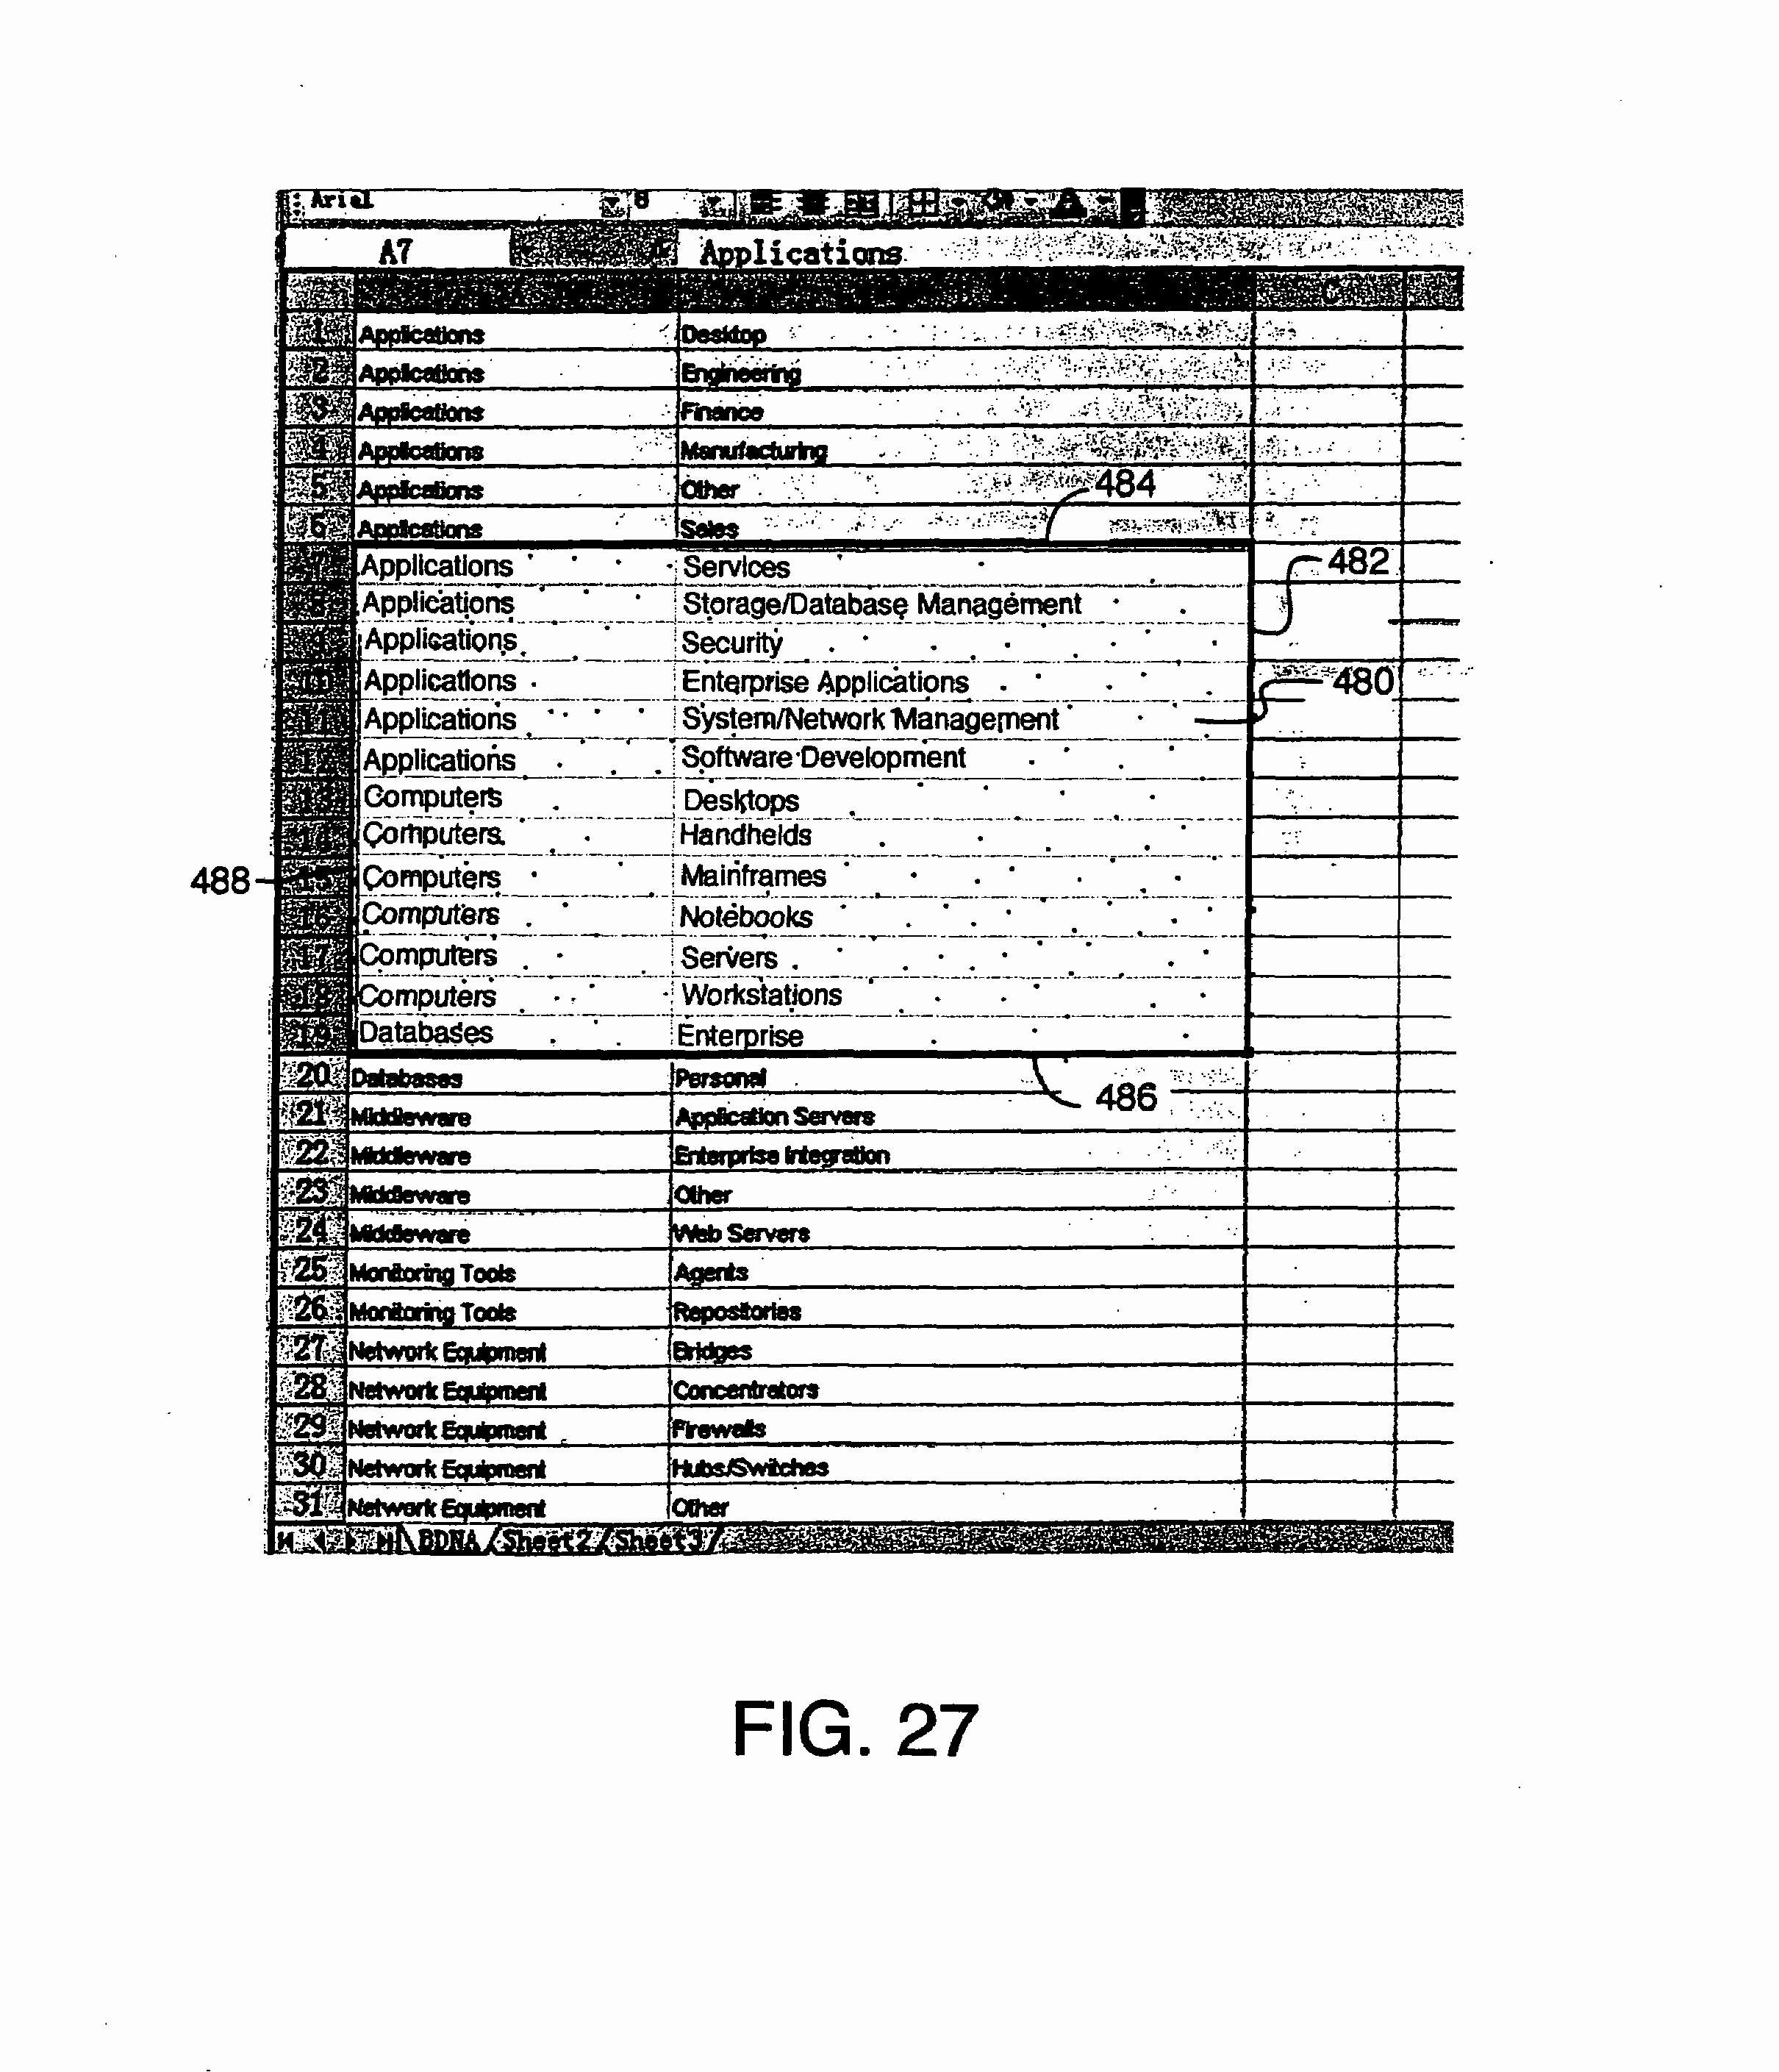 Nist 800 53 Security Controls Spreadsheet Pertaining To Nist 800 53 Security Controls Spreadsheet With 50 New Nist Sp 800 53